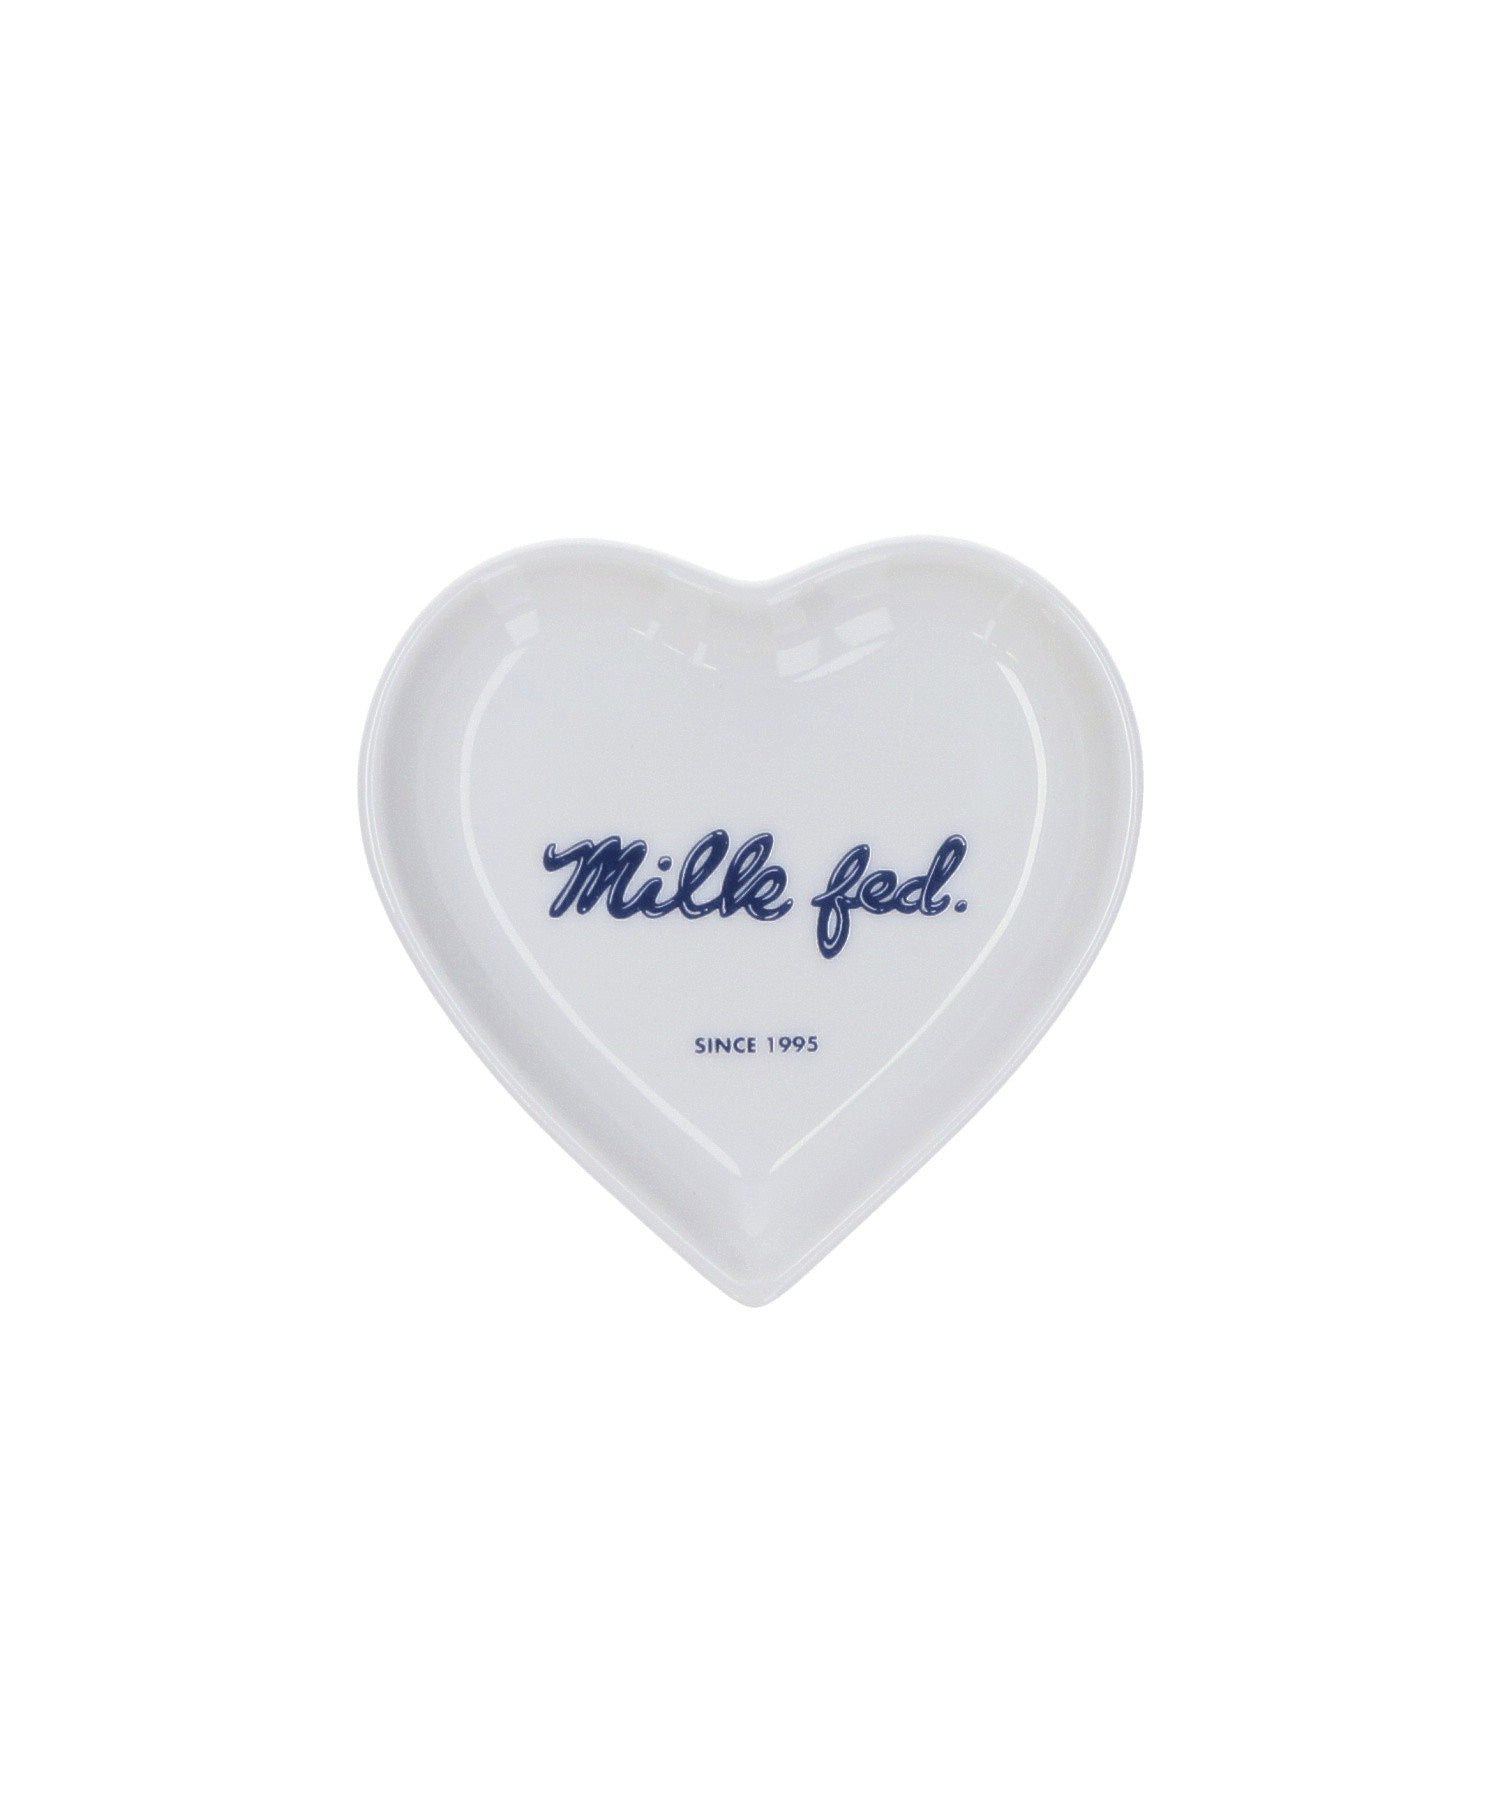 ICING LOGO HEART SMALL PLATE